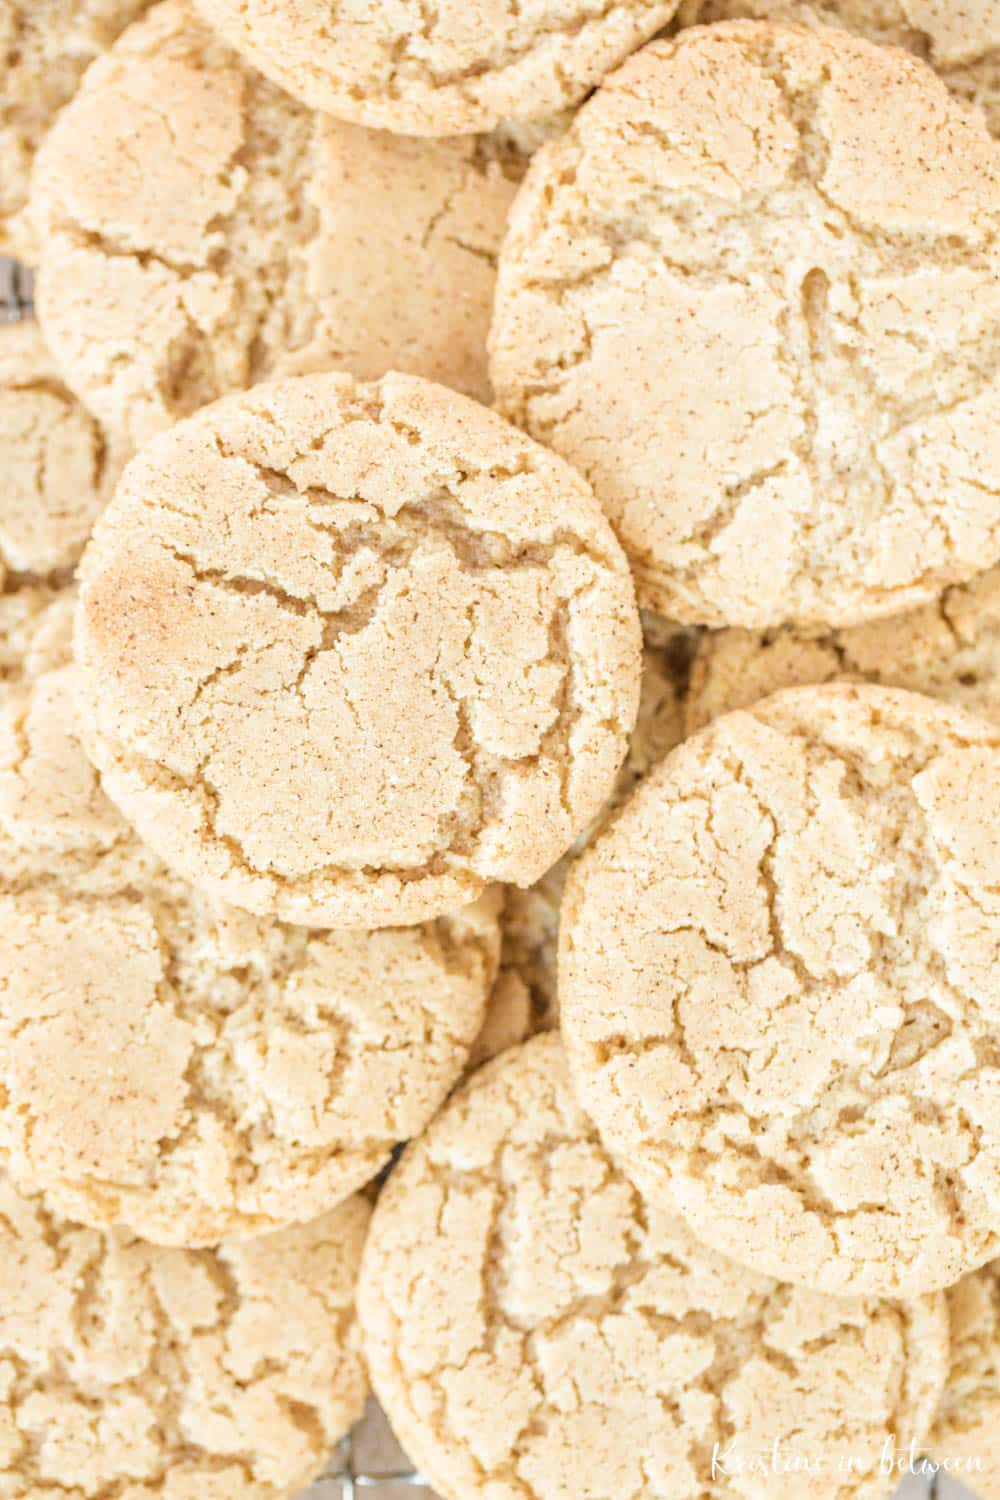 A pile of cookies with cracked tops sprinkled with cinnamon and sugar.